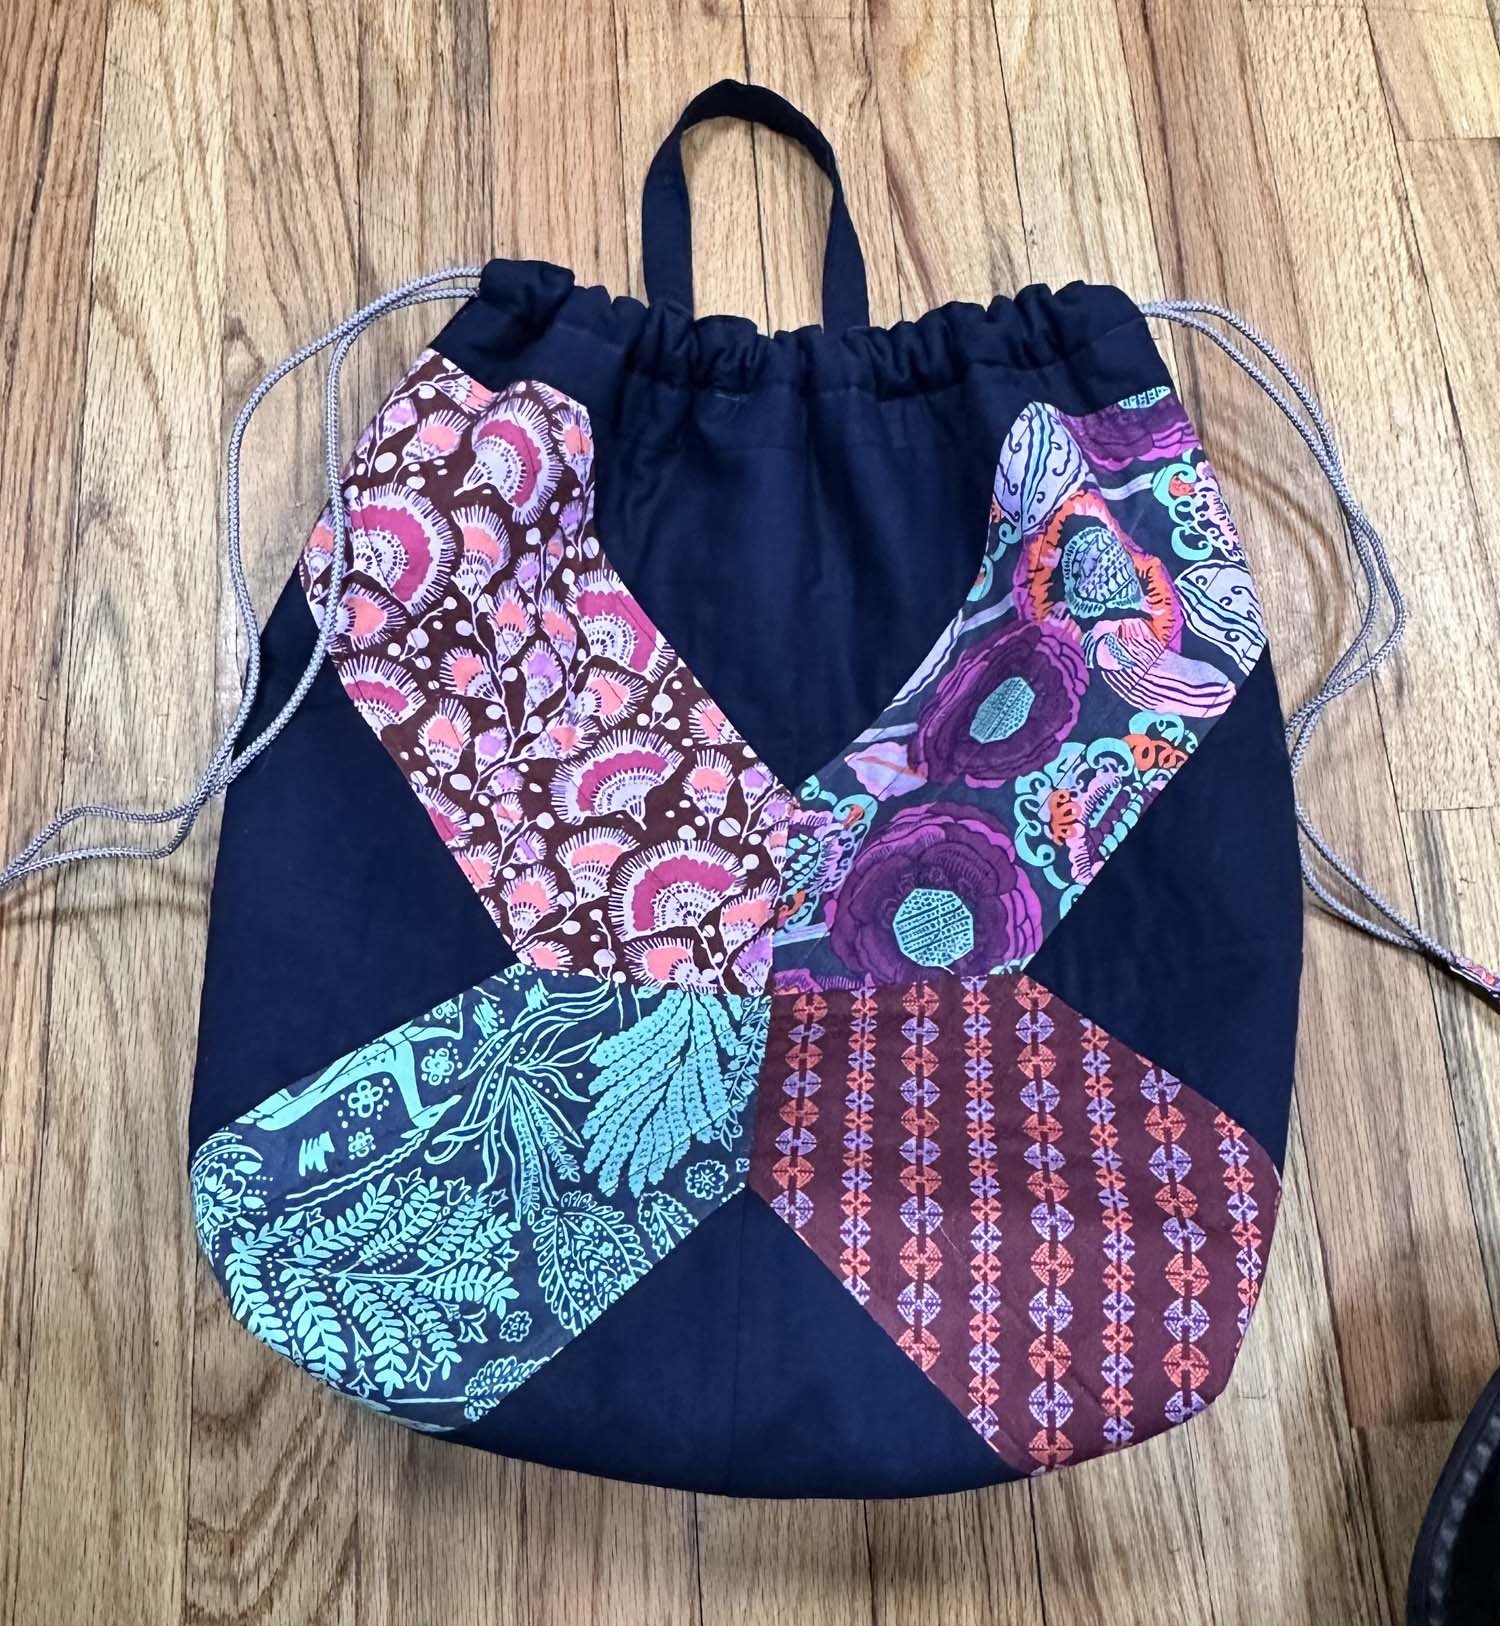 Margaret Marcy Project Bag